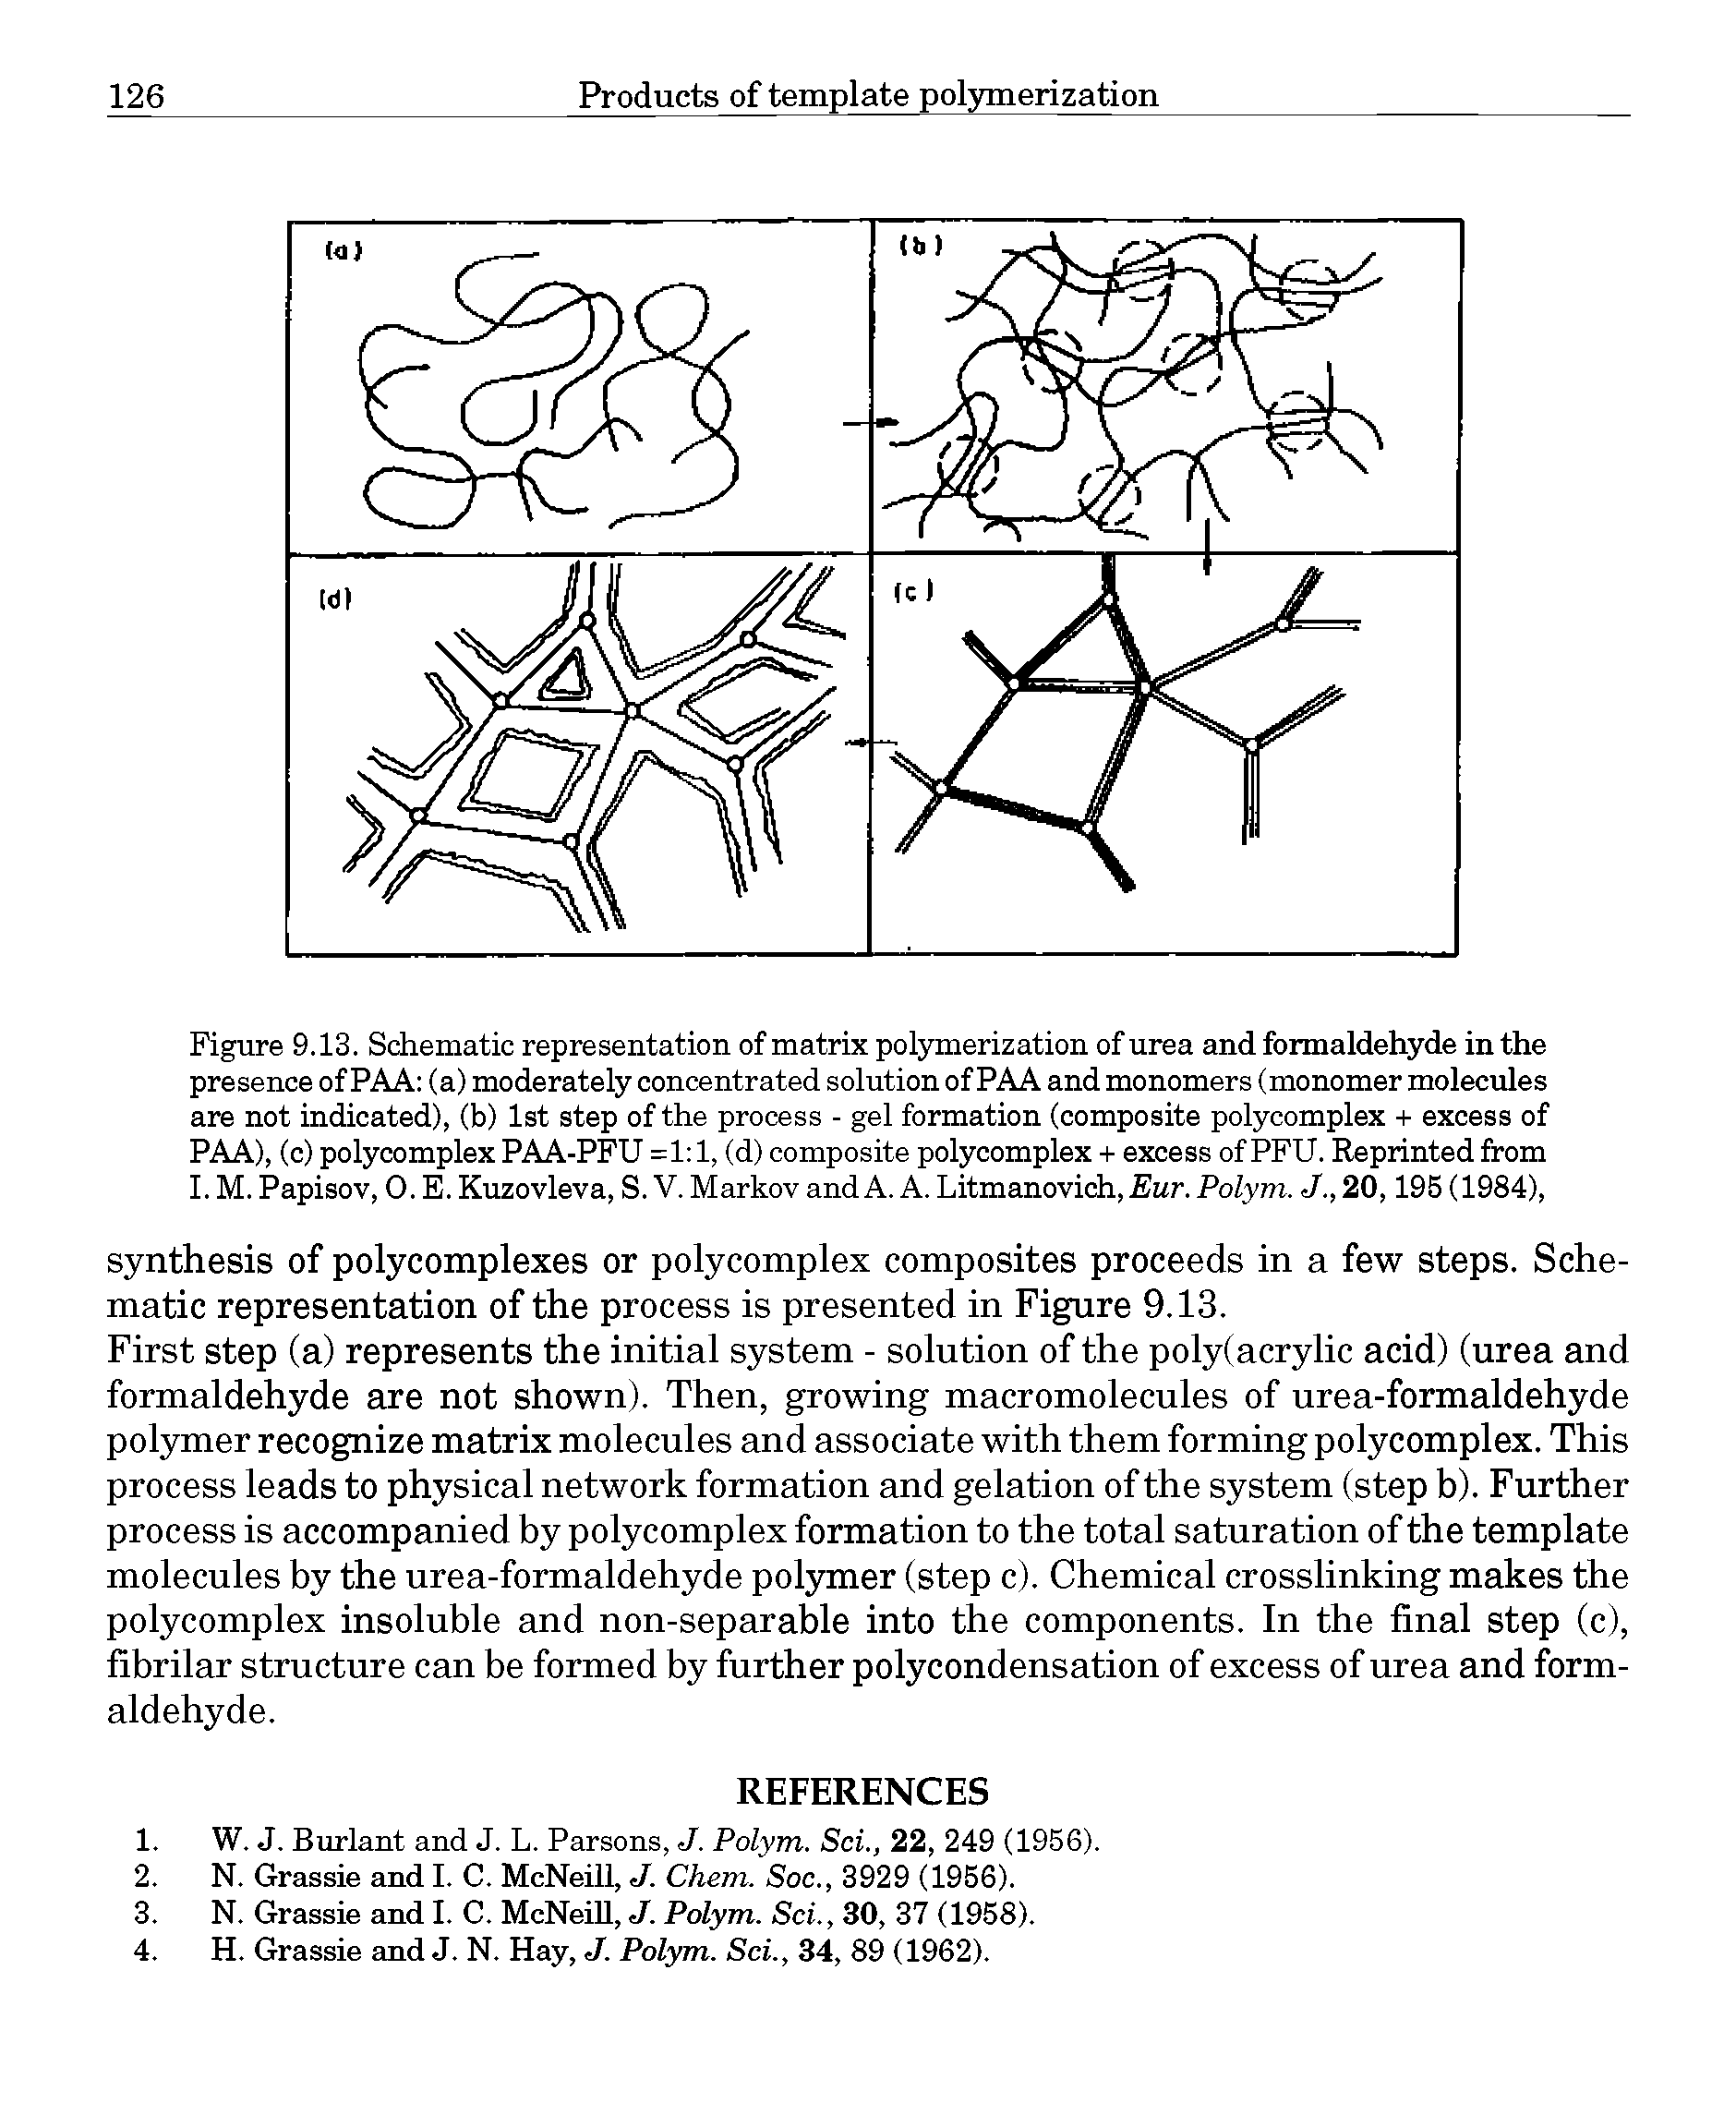 Figure 9.13. Schematic representation of matrix polymerization of urea and formaldehyde in the presence of PAA (a) moderately concentrated solution of PAA and monomers (monomer molecules are not indicated), (b) 1st step of the process - gel formation (composite polycomplex + excess of PAA), (c) polycomplex PAA-PFU =1 1, (d) composite polycomplex + excess of PFU. Reprinted from I. M. Papisov, 0. E. Kuzovleva, S. V. Markov and A. A. Litmanovich, Eur. PoZy/n. J.,20,195(1984),...